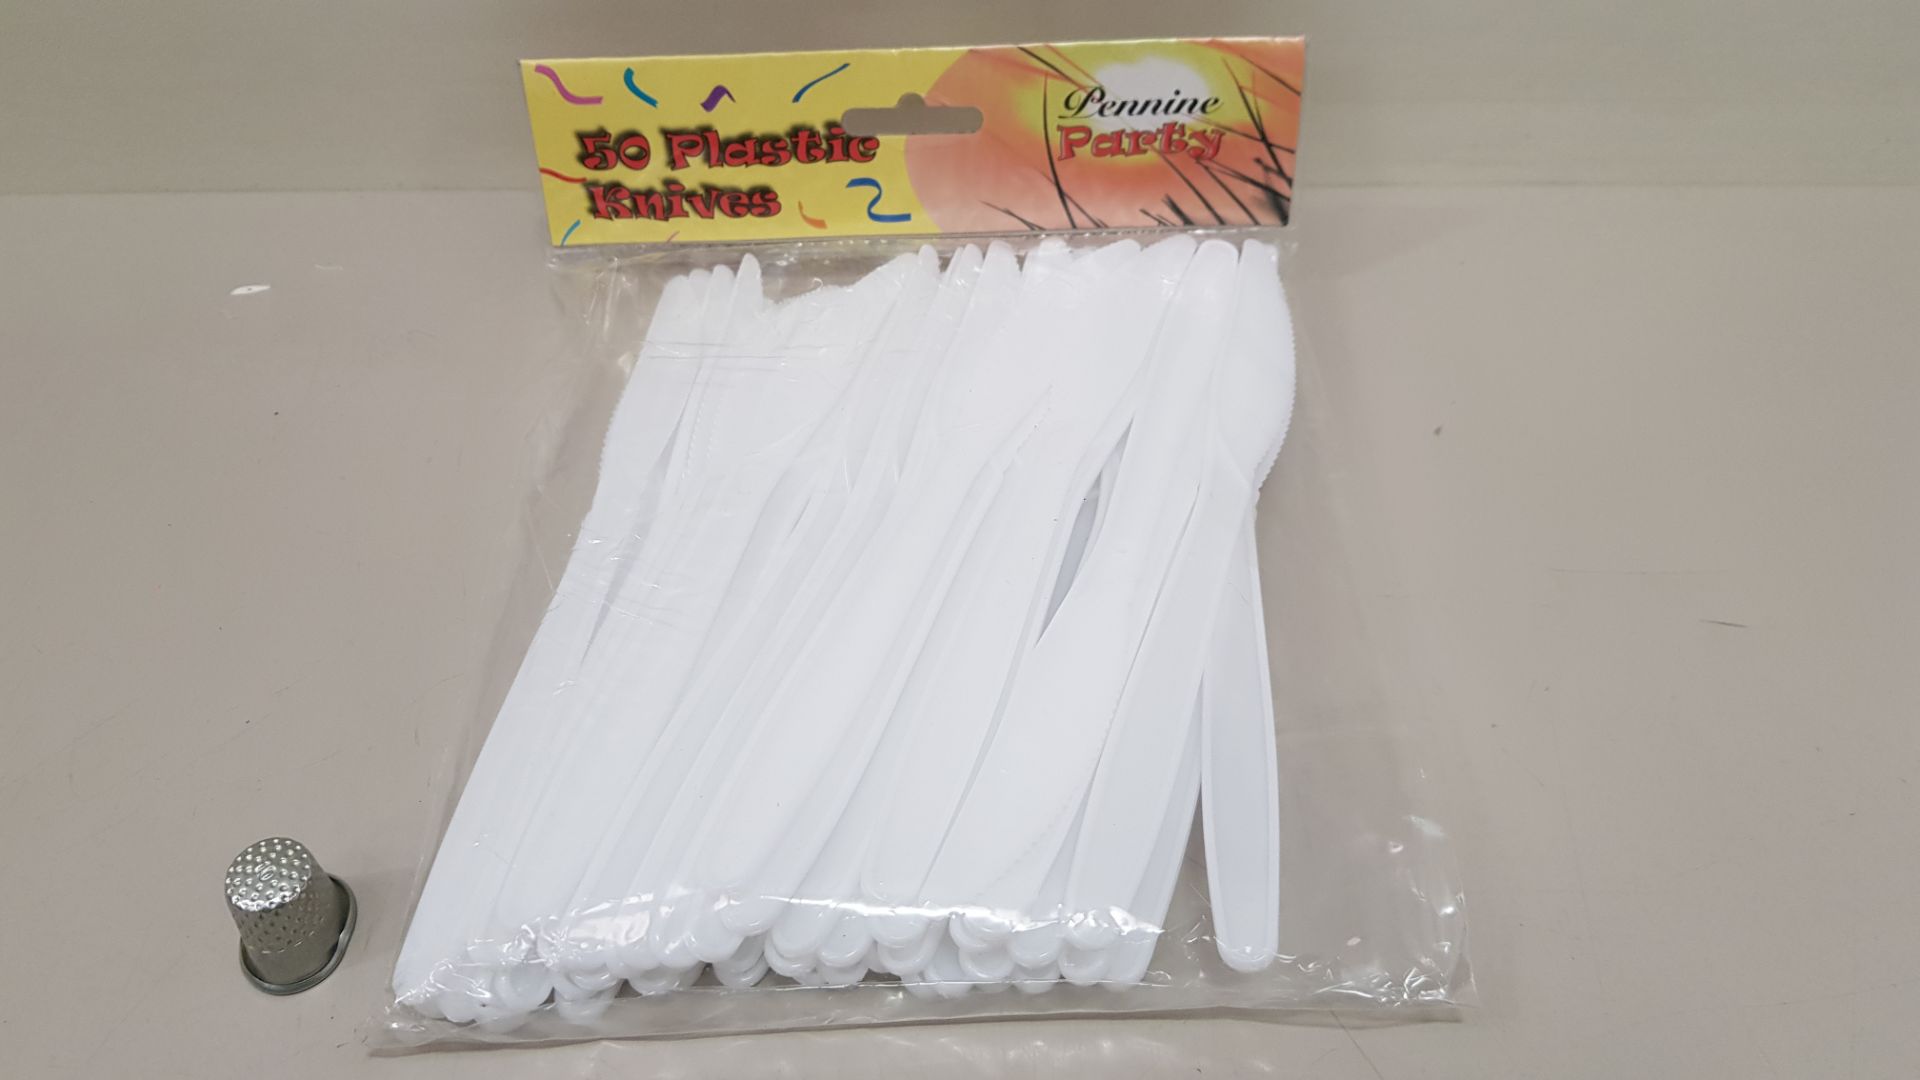 216 X BRAND NEW PACK OF 50 PLASTIC KNIVES IN 3 CARTONS